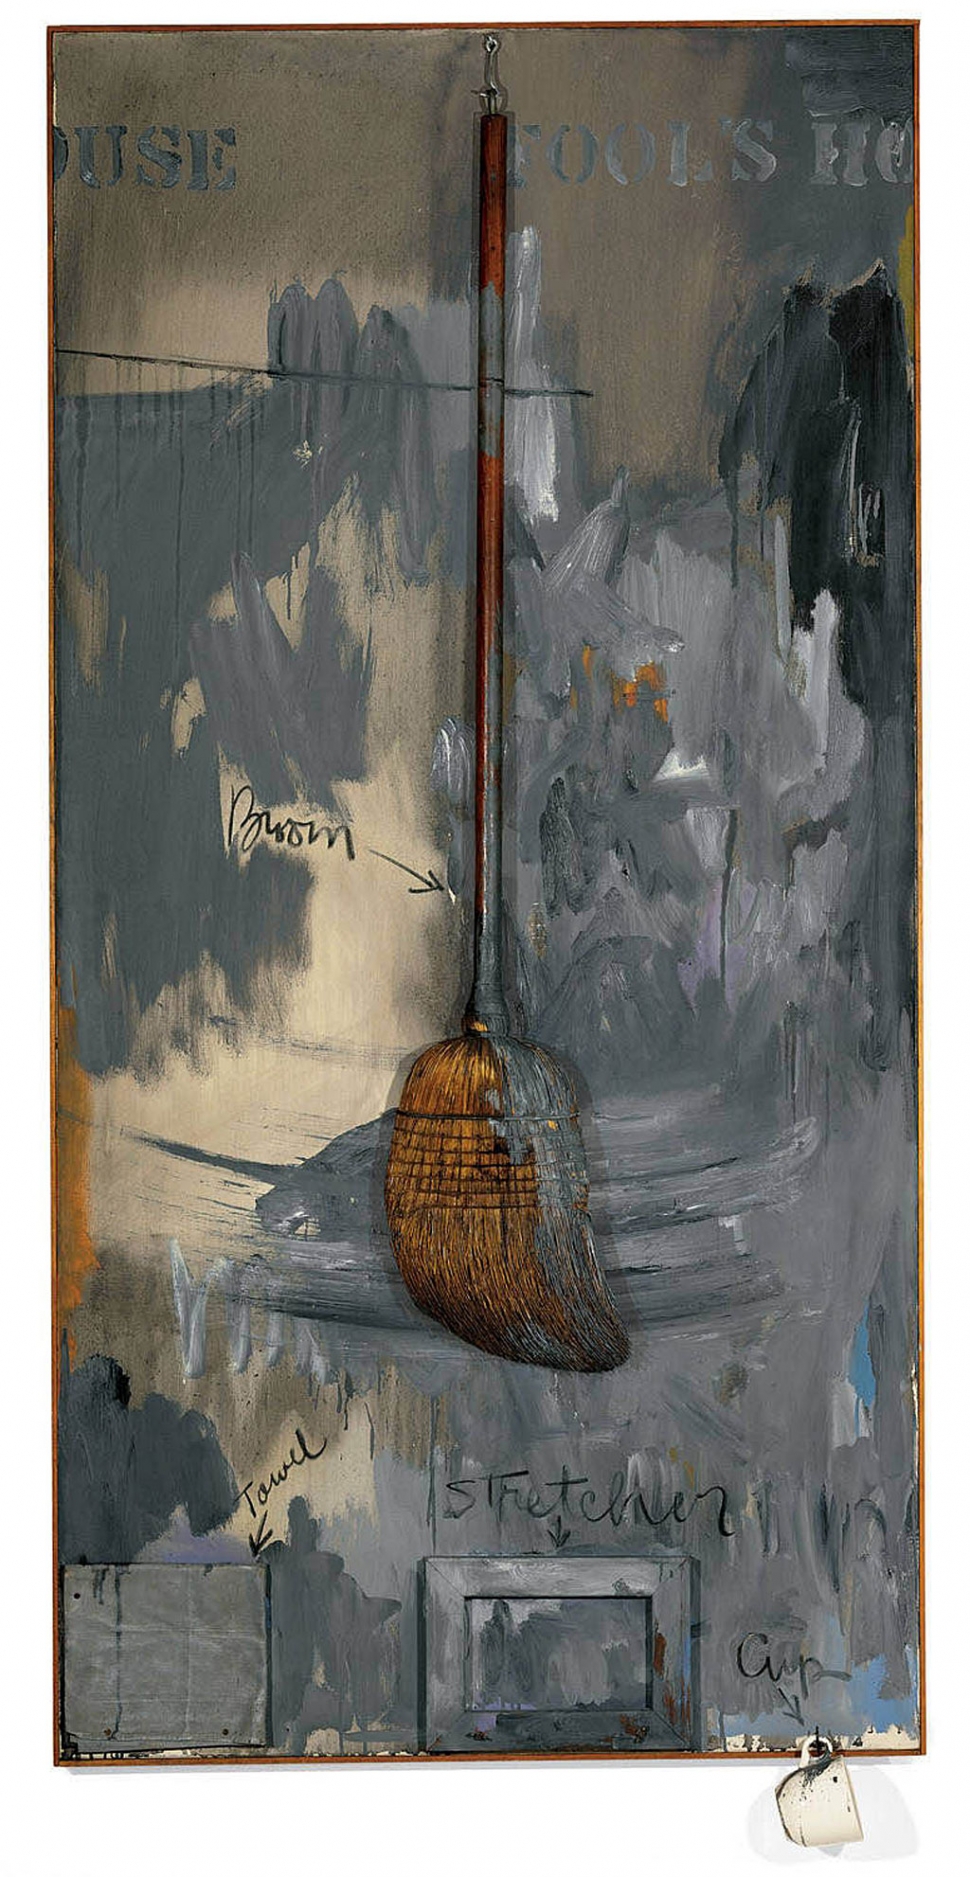 Jasper Johns - “Fools House”: Anonymous Collector, American Art